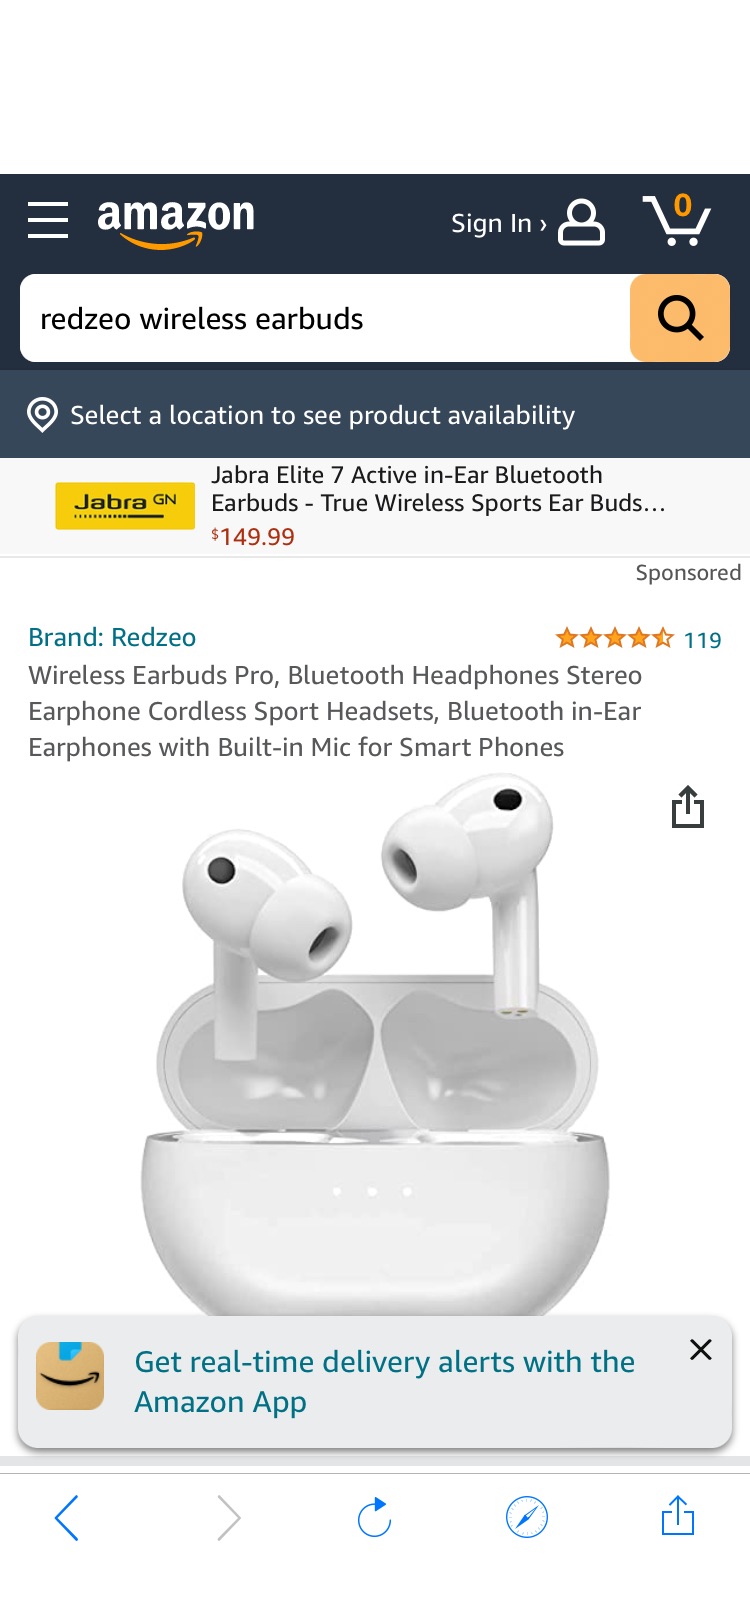 Amazon.com: Wireless Earbuds Pro, Bluetooth Headphones Stereo Earphone Cordless Sport Headsets, Bluetooth in-Ear Earphones with Built-in Mic for Smart Phones : Everything Else无线蓝牙耳机